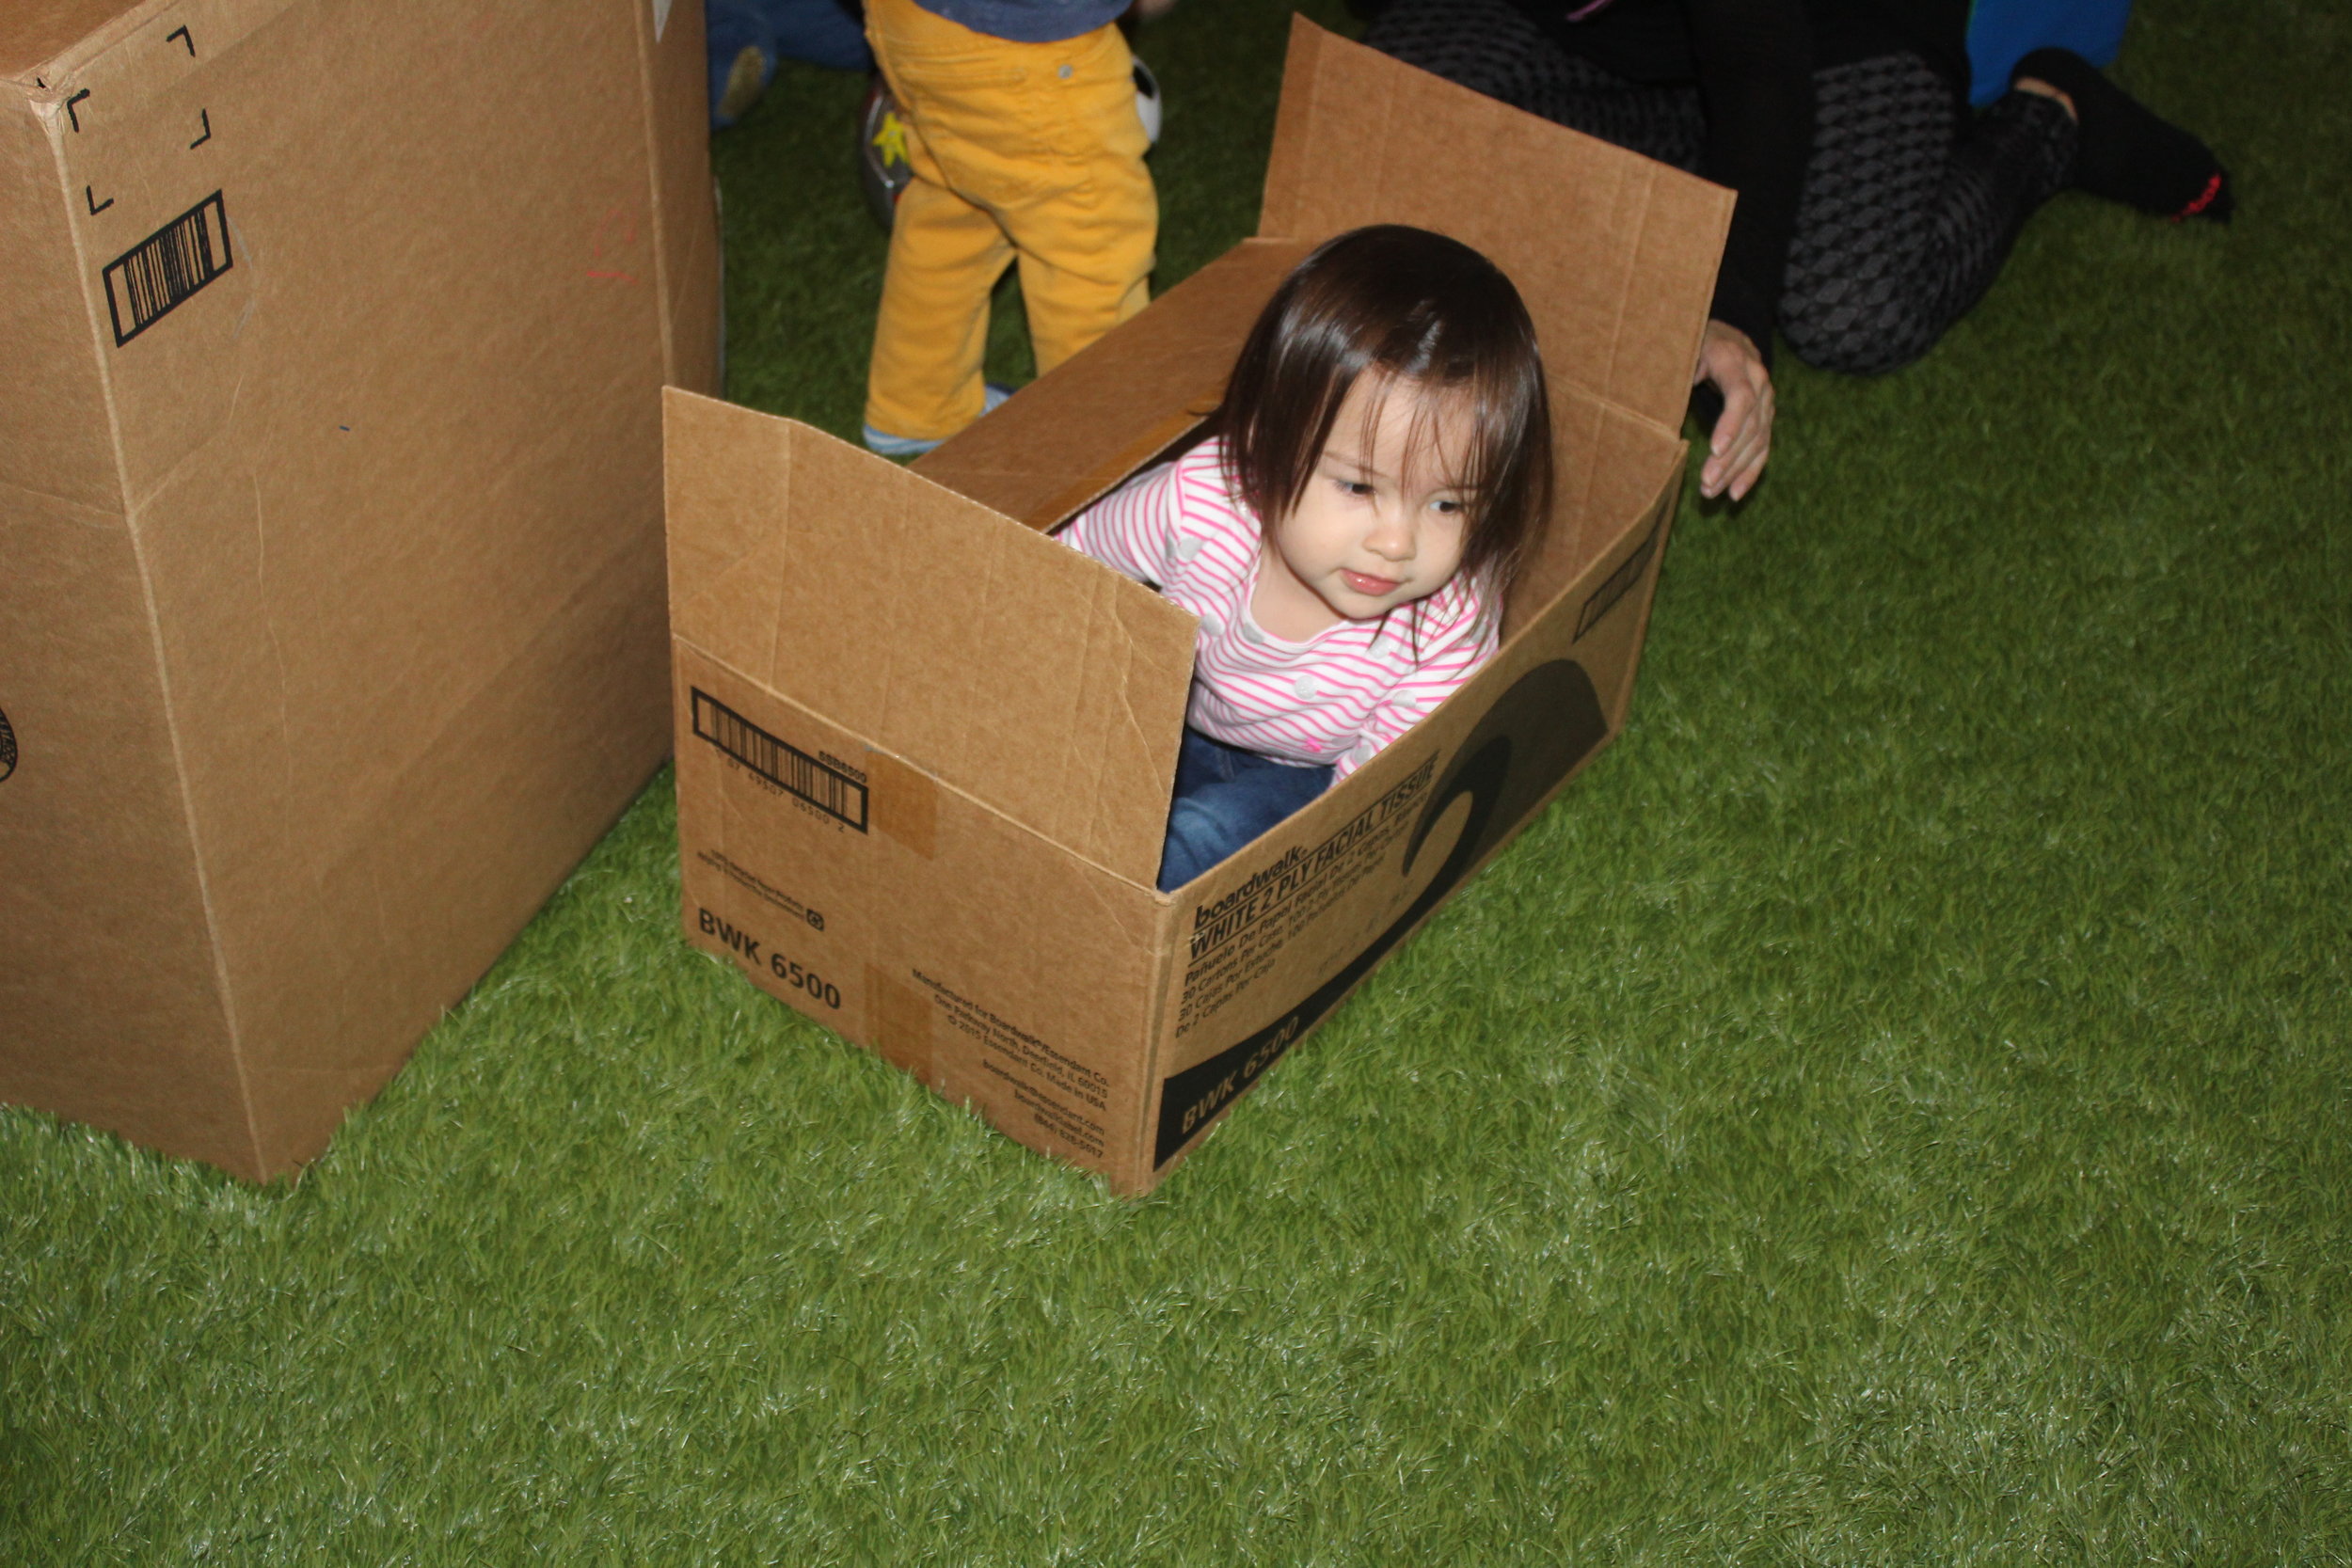  Toddlers are learning to understand their own space. &nbsp;Children are constantly testing their body; they crawl in, around, over, and under things. &nbsp;The first thing toddlers do when they see a cardboard box is to try to get in it. &nbsp;As th